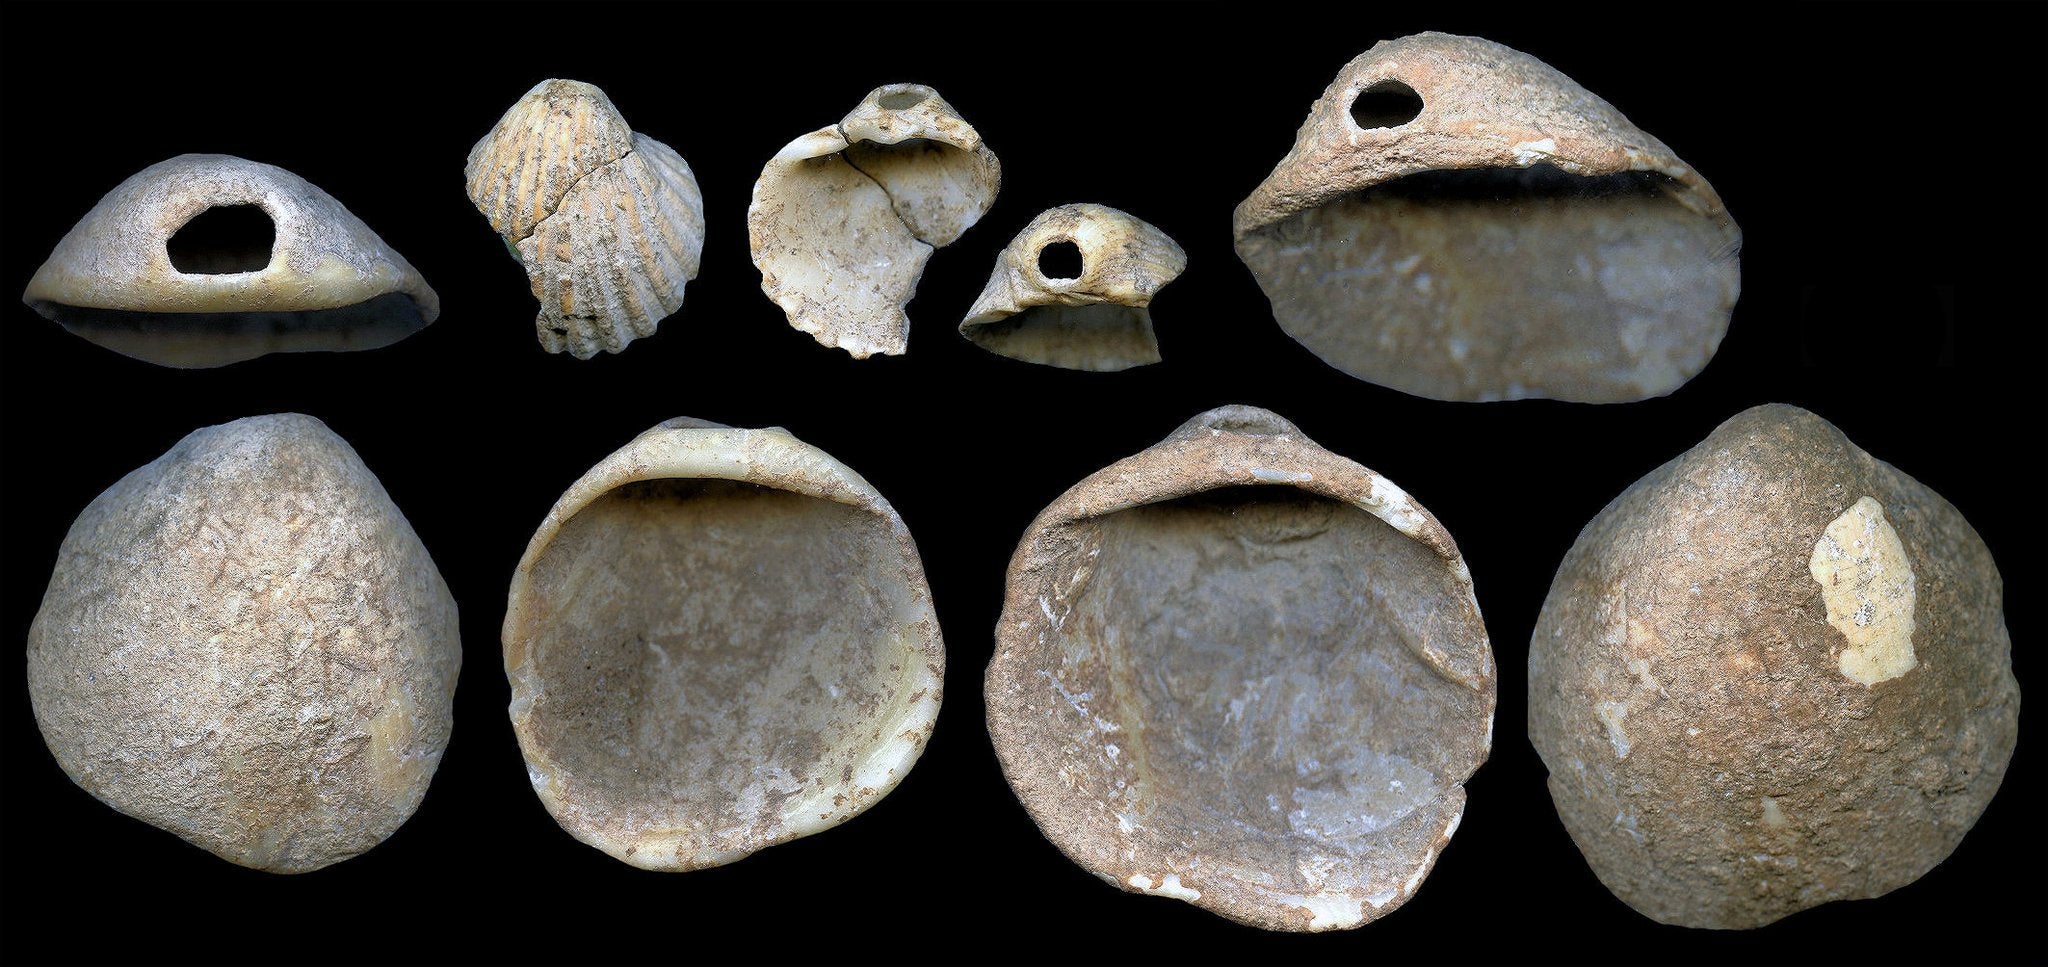 Pierced and coloured shells – previously thought to have been made by humans, but the new study suggests Neanderthals may have been responsible (J Zilhao)